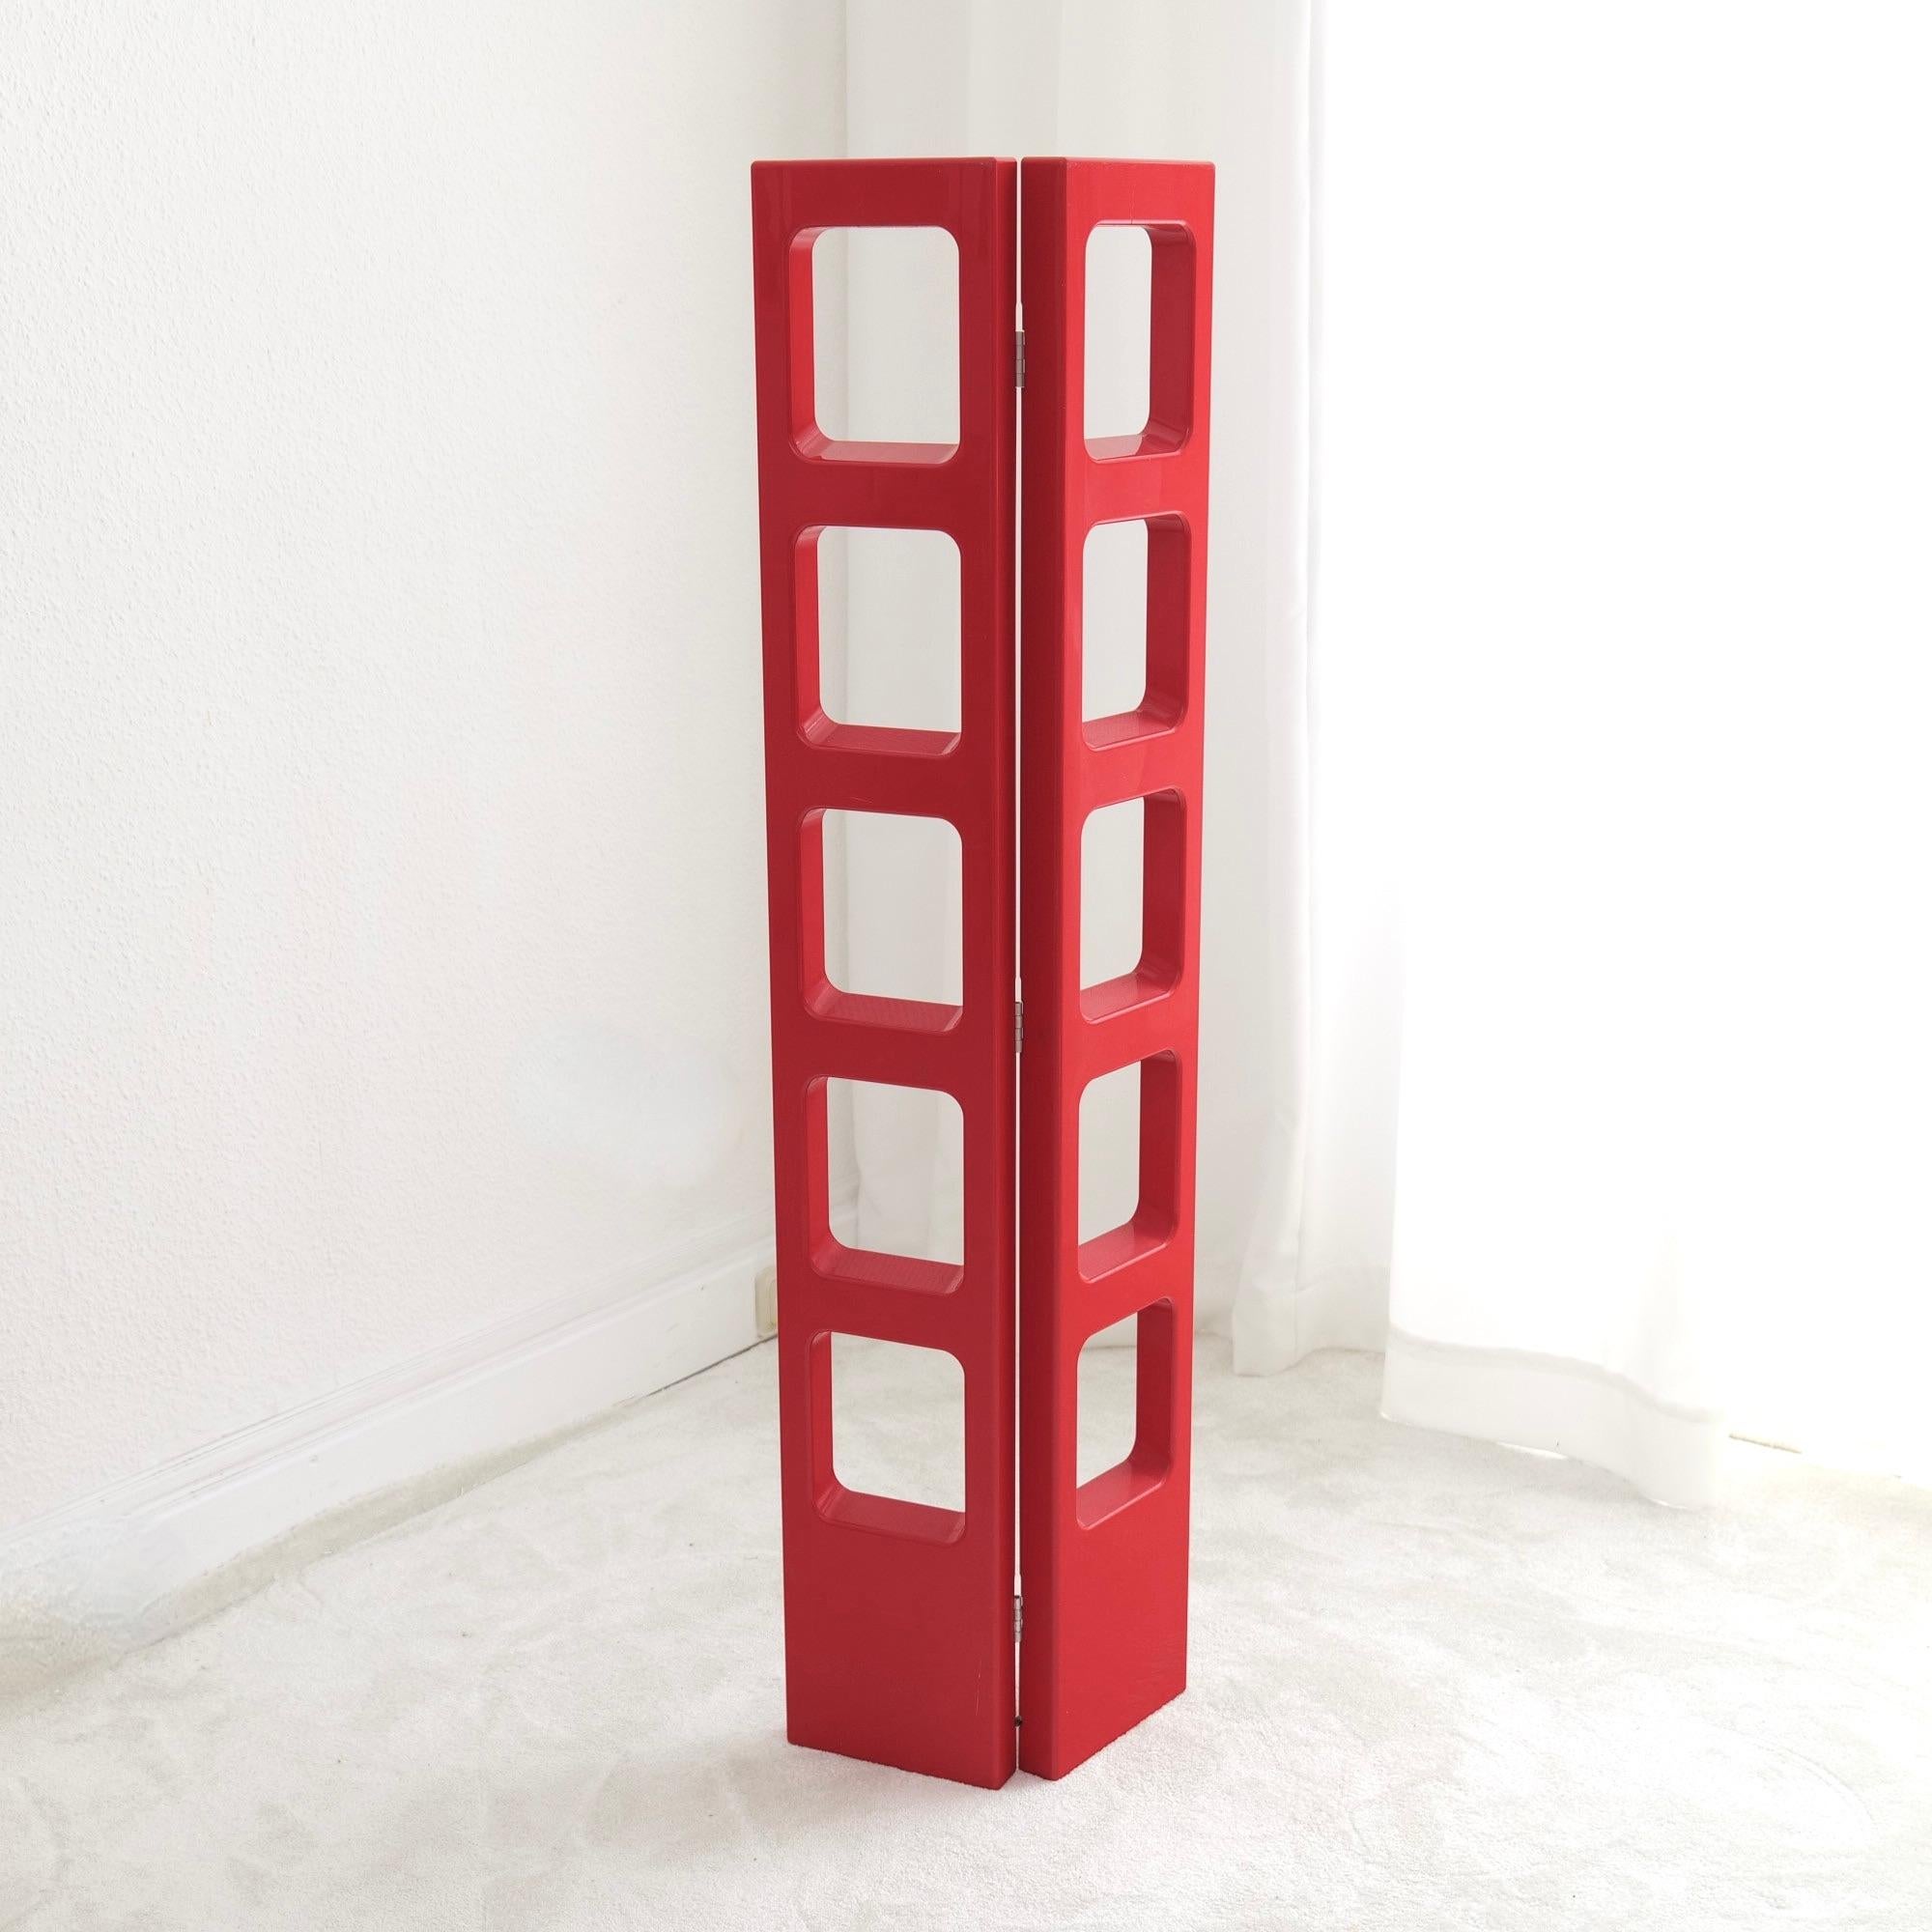 Metal space age ladder - scaleo Velca Legnano by L&O Design Italy For Sale